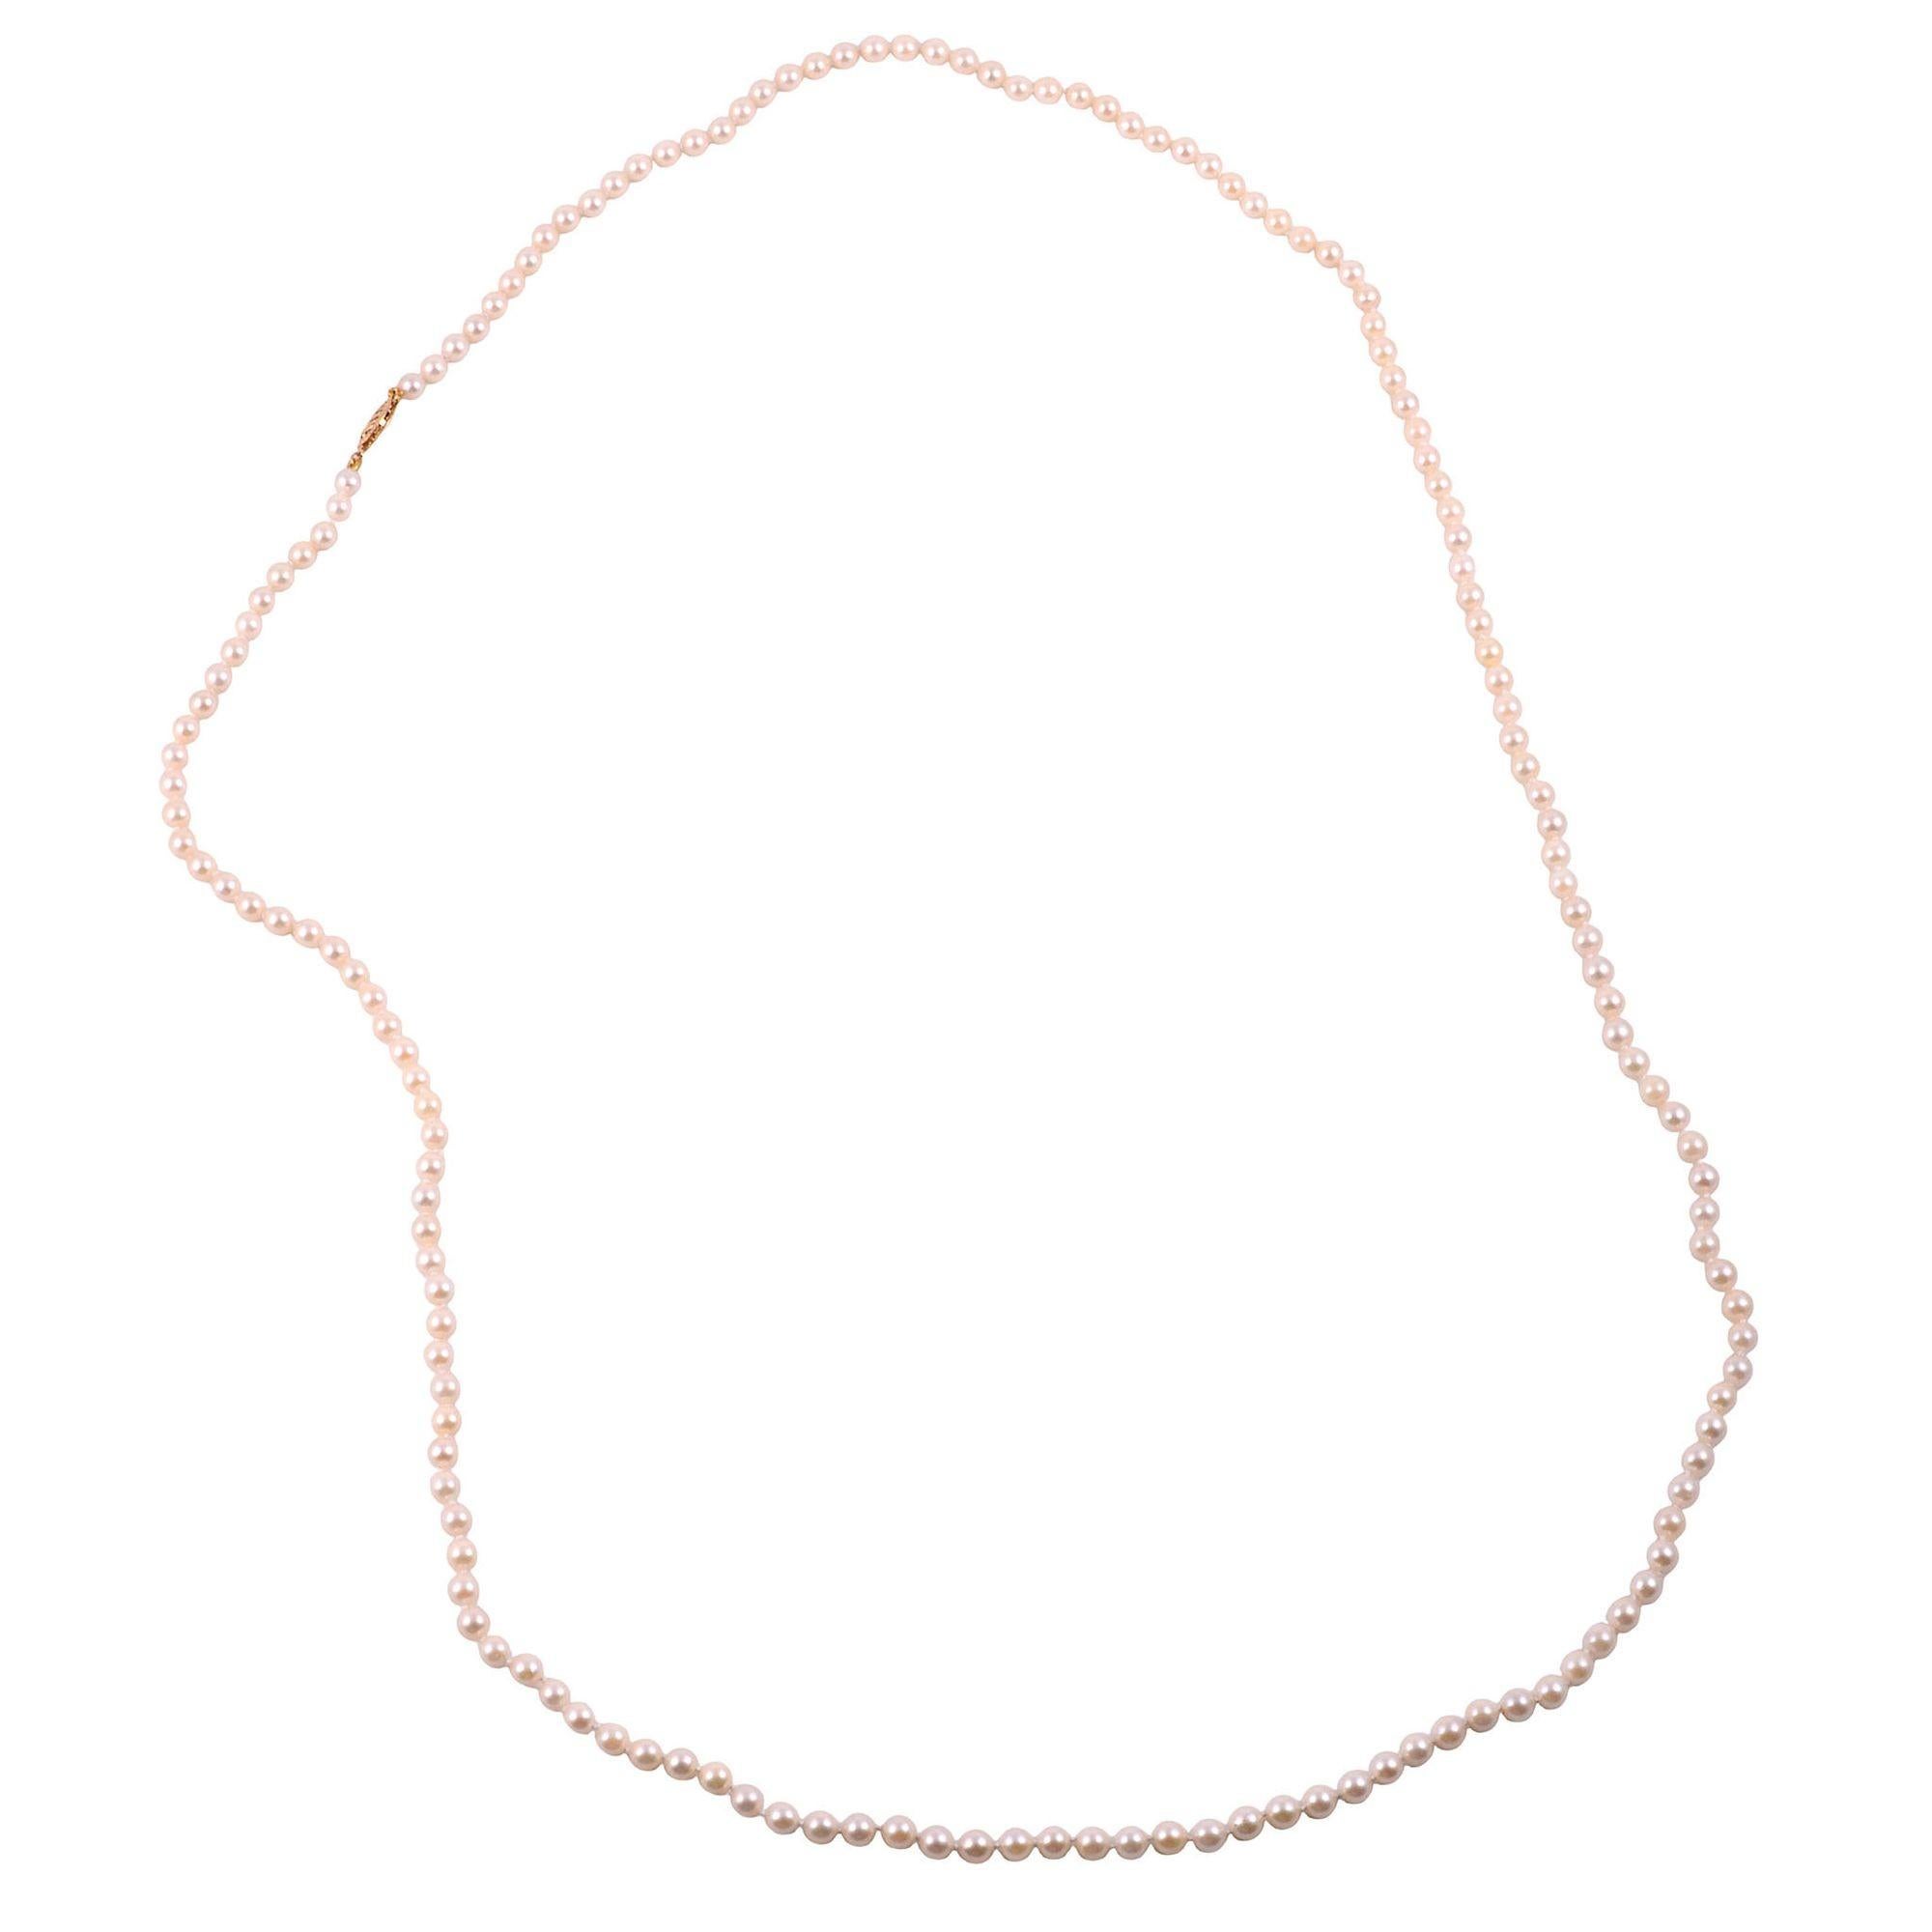 Estate 38 inch Akoya pearl necklace. This 38 inch strand of Akoya pearls is secured with a 14 karat gold pearl clasp. [KIMH 524]